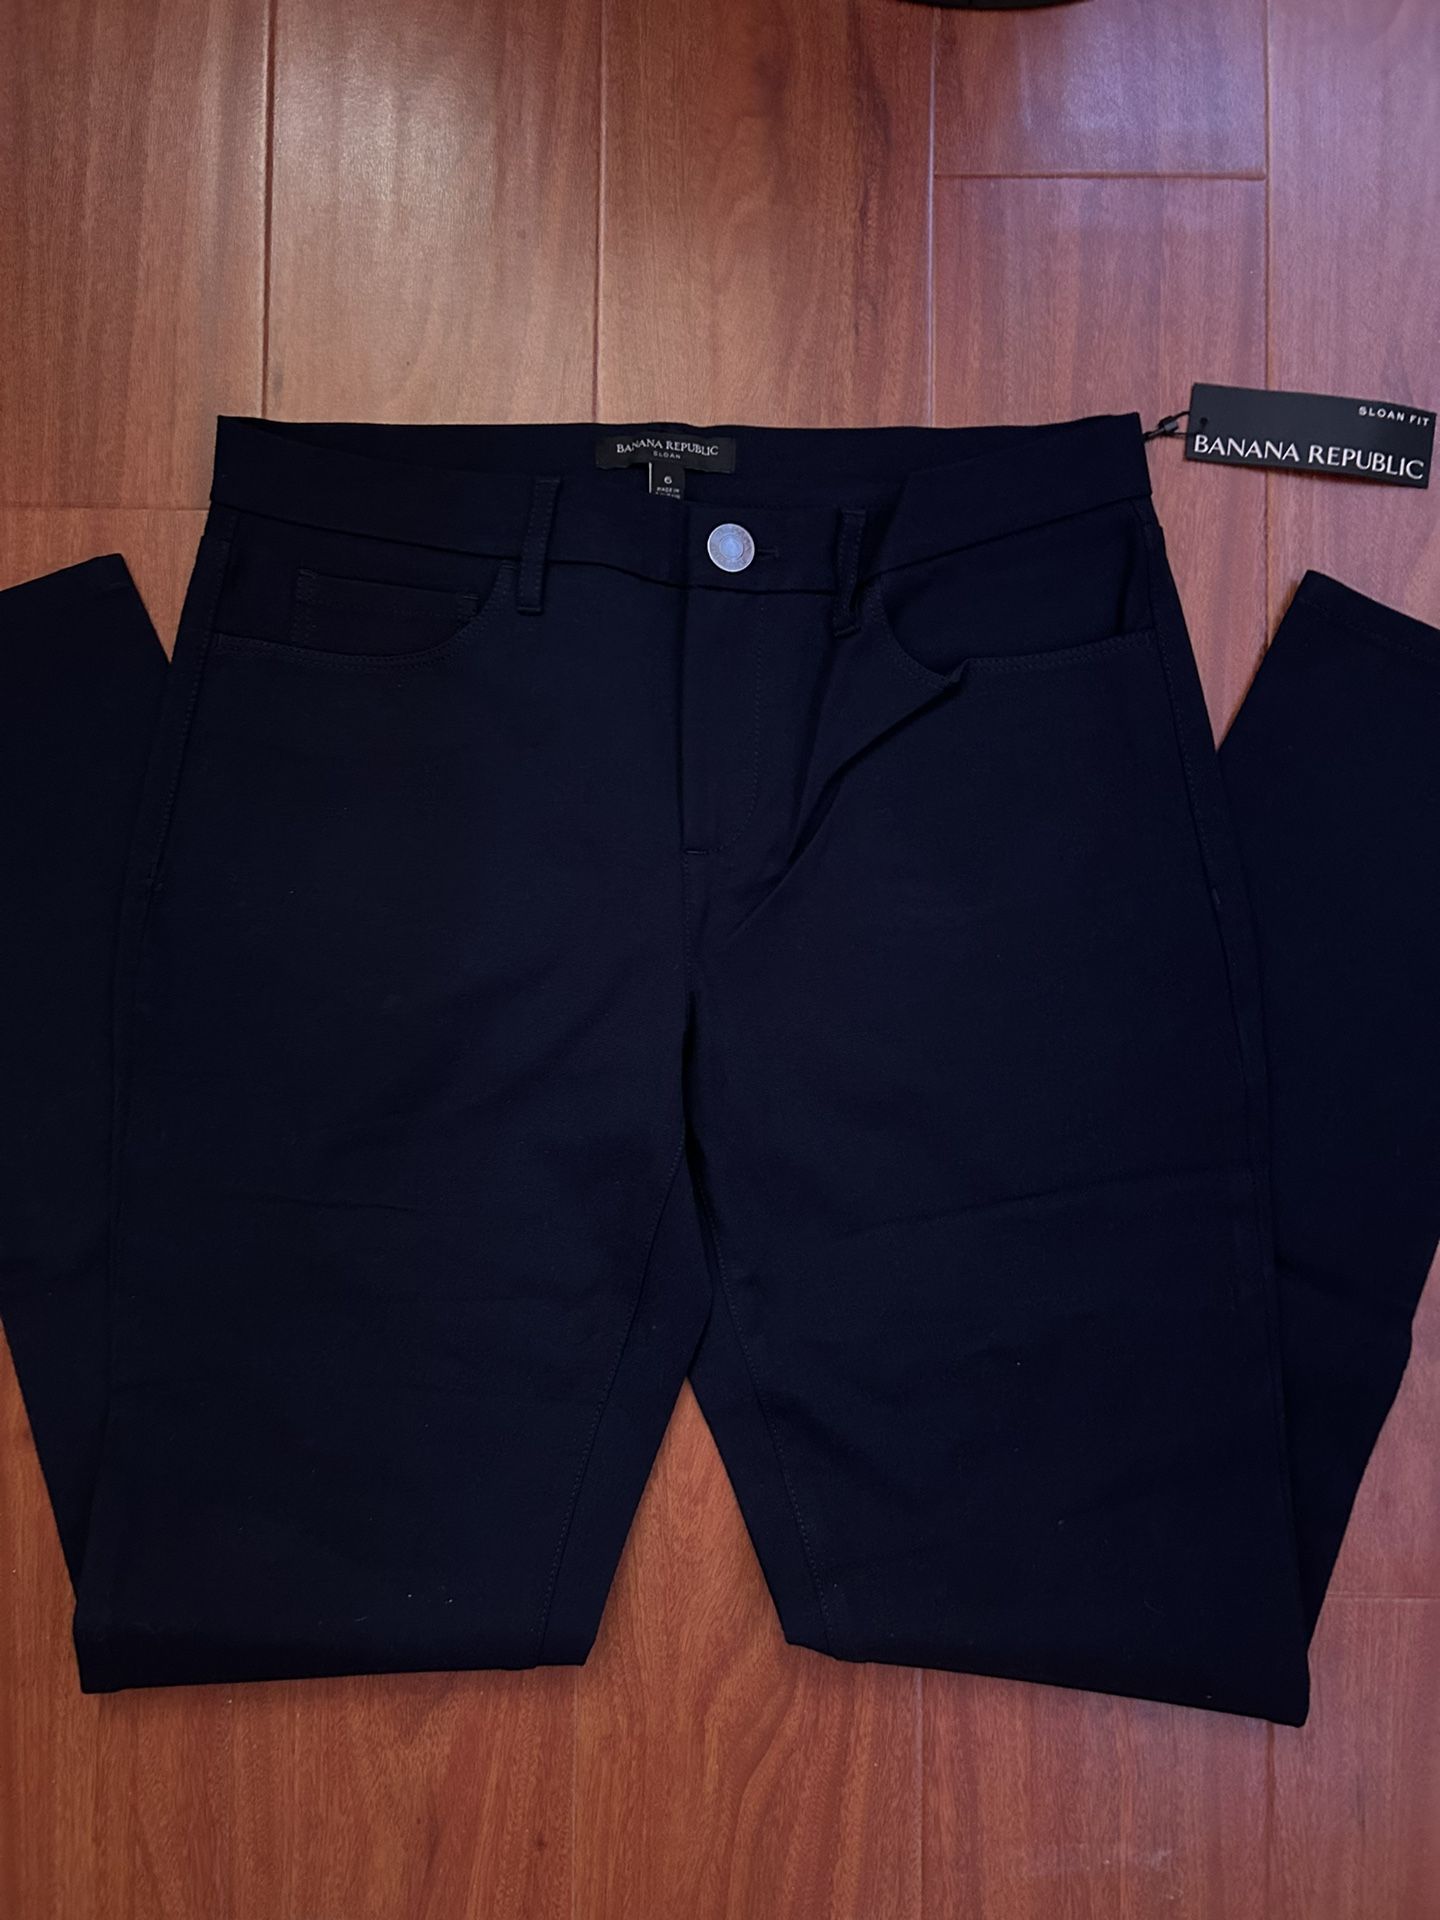 Banana Republic Work Pants for Sale in Arcadia, CA - OfferUp